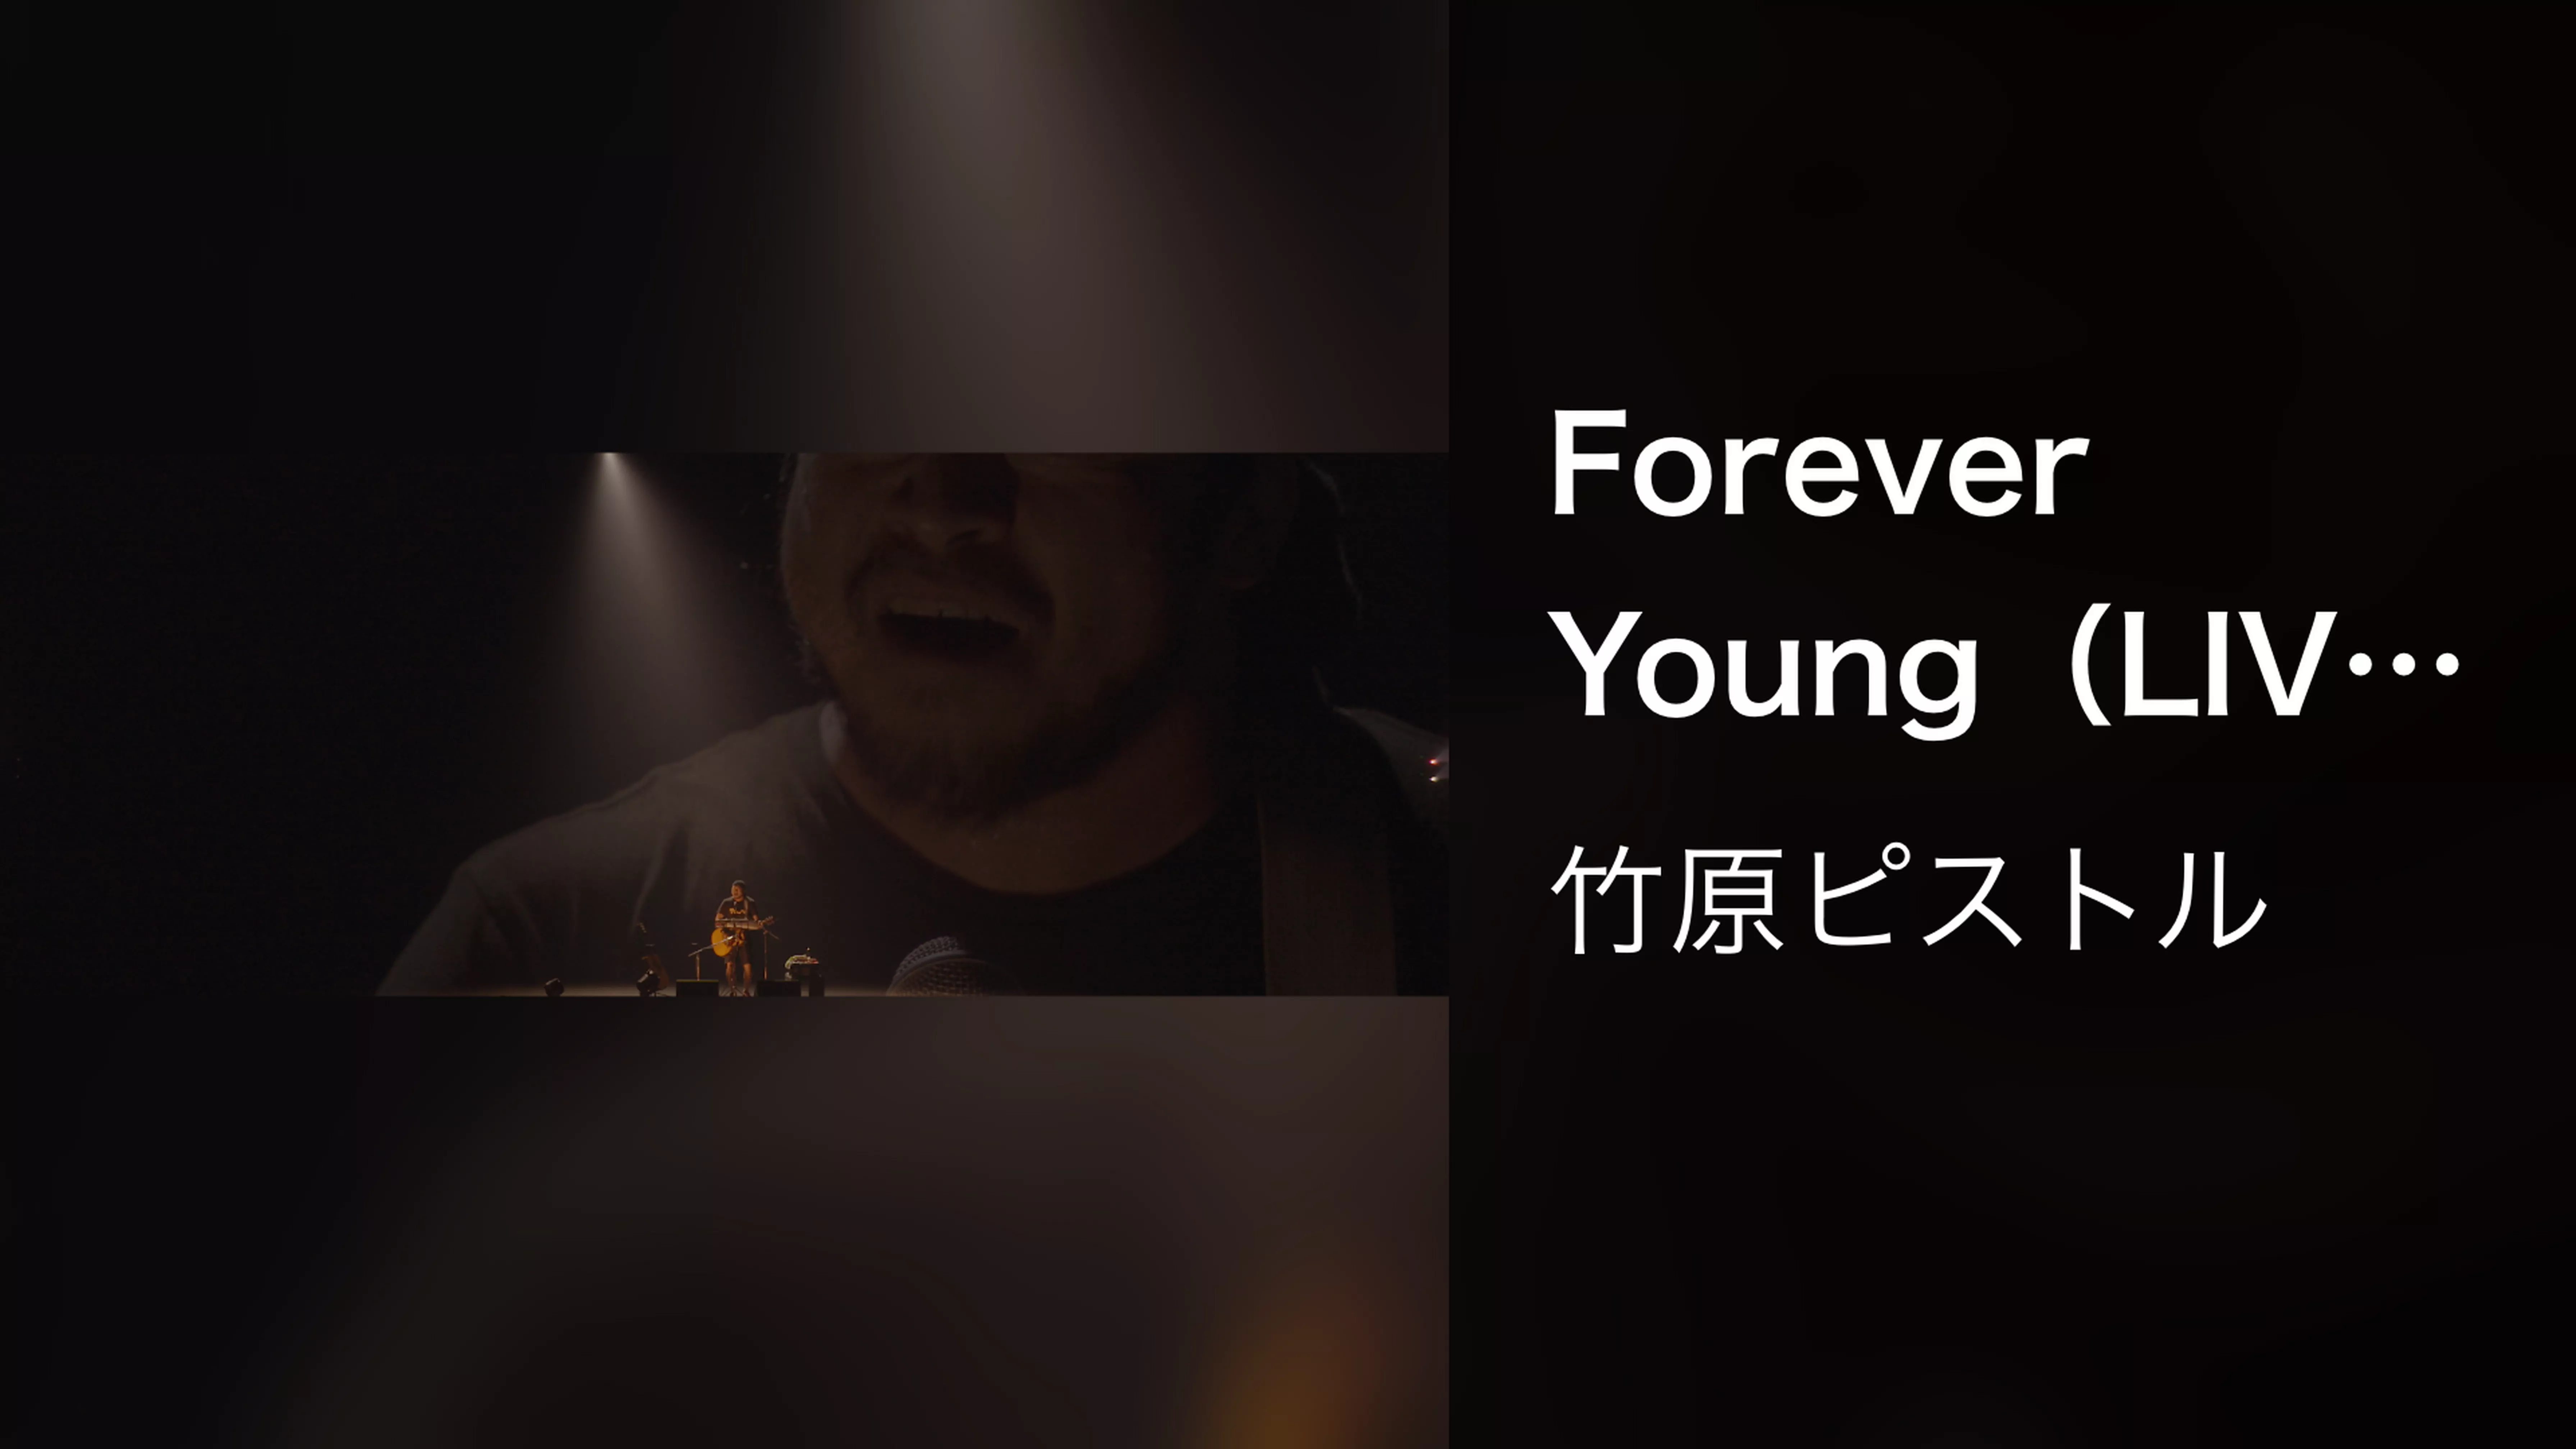 Forever Young（LIVE AT 武道館 2018.12.22）